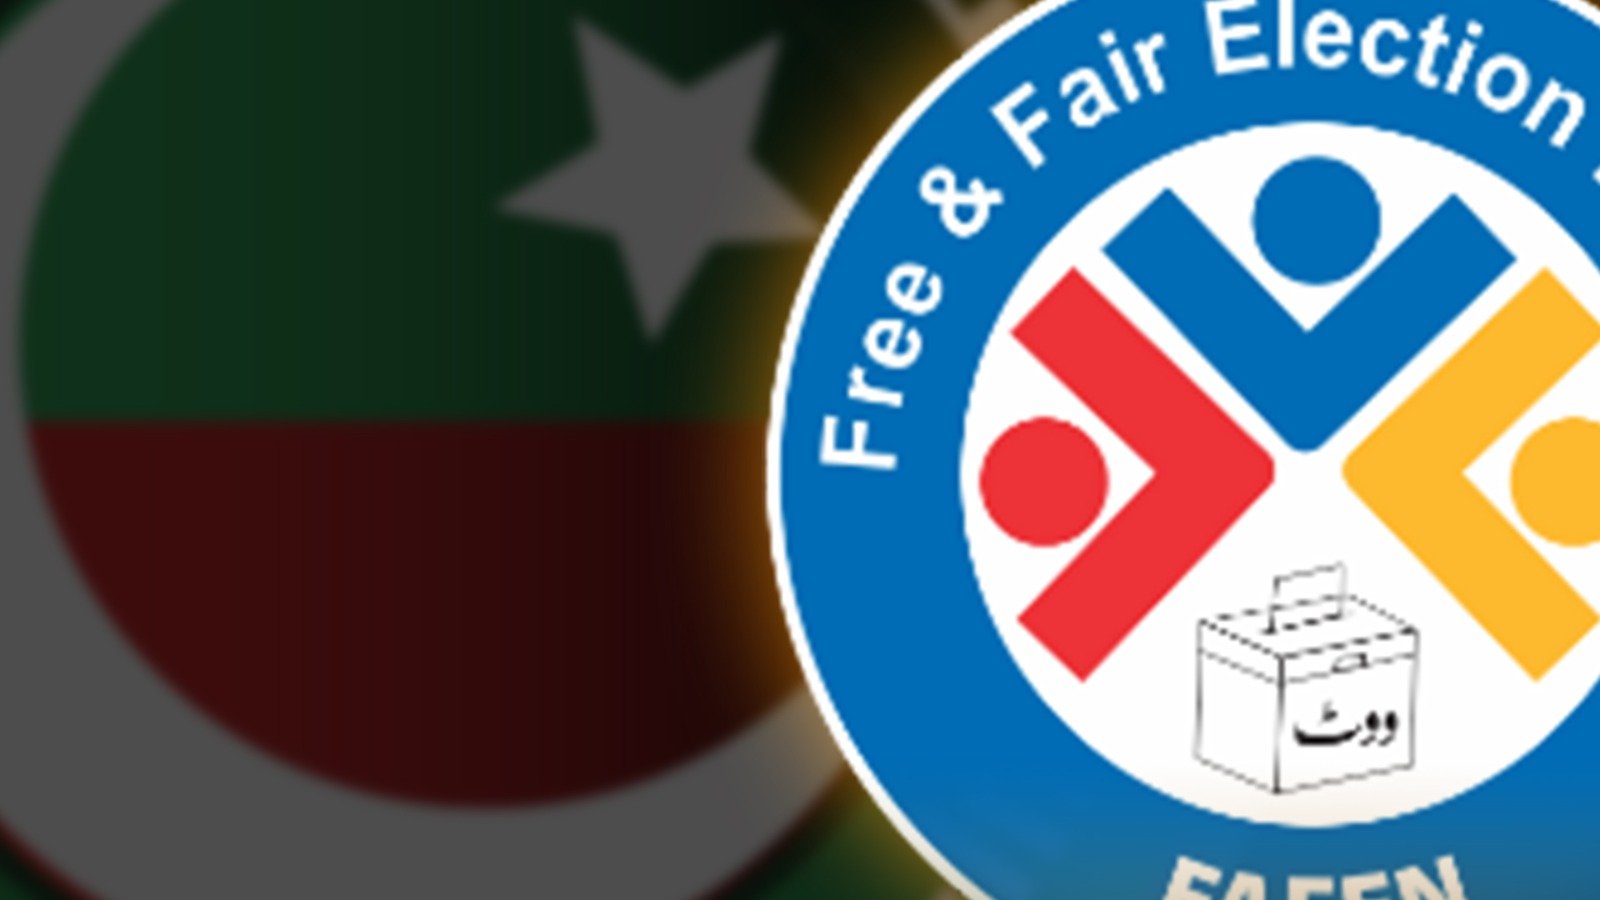 17 of 23 election tribunals functional, 46% petitioners PTI-independent candidates: FAFEN report